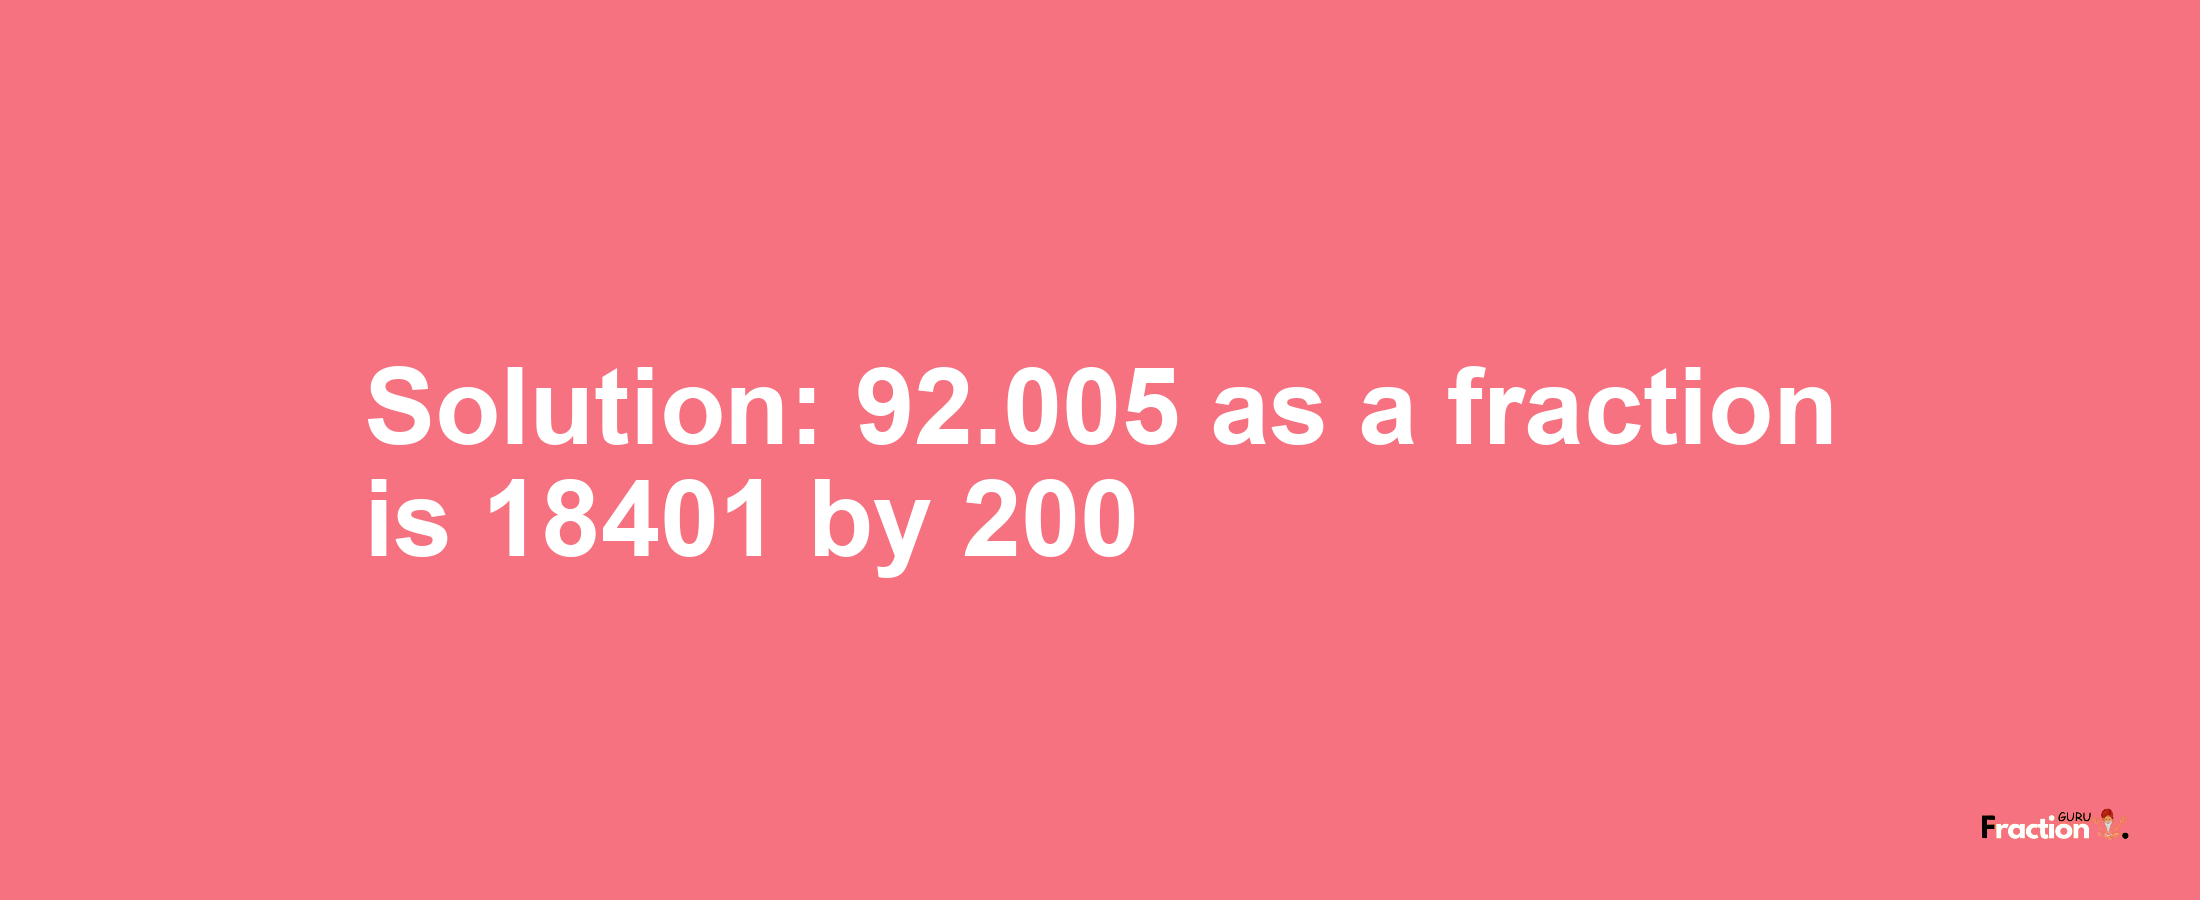 Solution:92.005 as a fraction is 18401/200